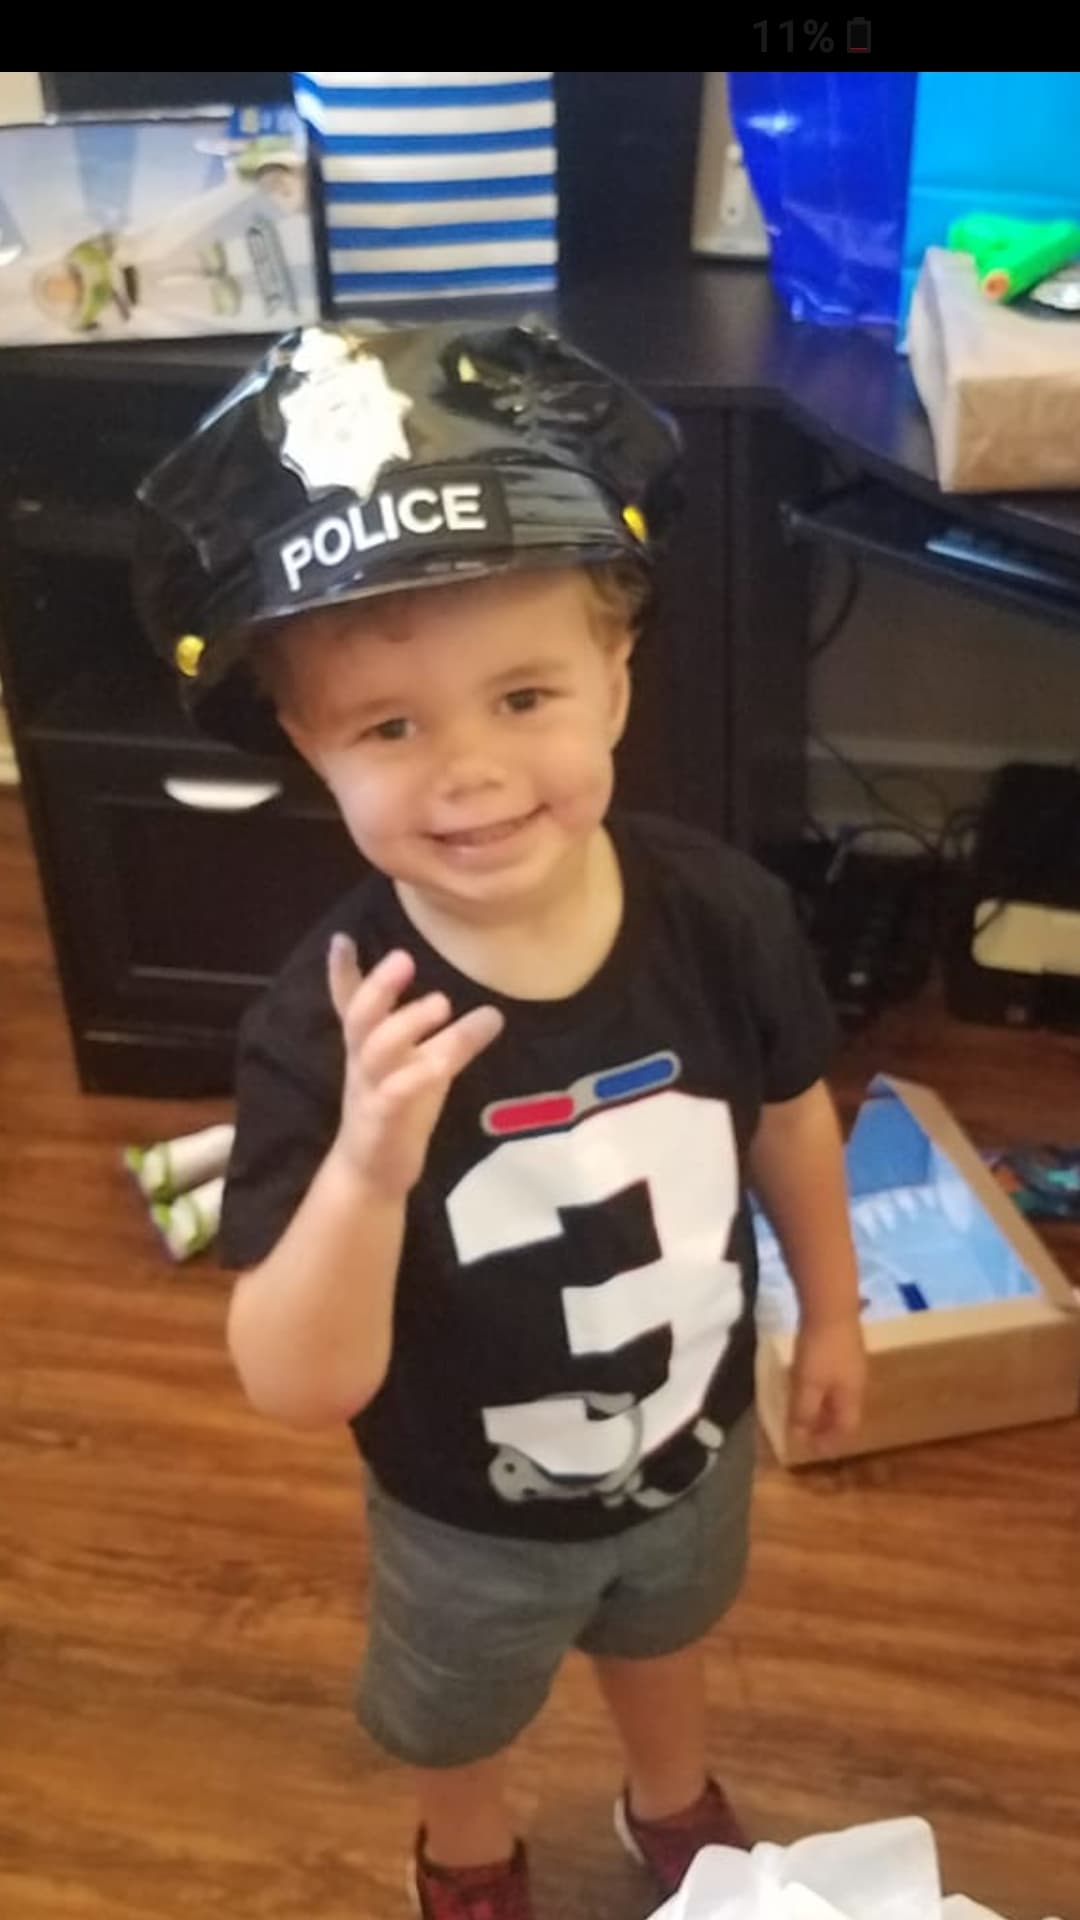 Local boy gets surprise from 'Boys in Blue' during police-themed ...